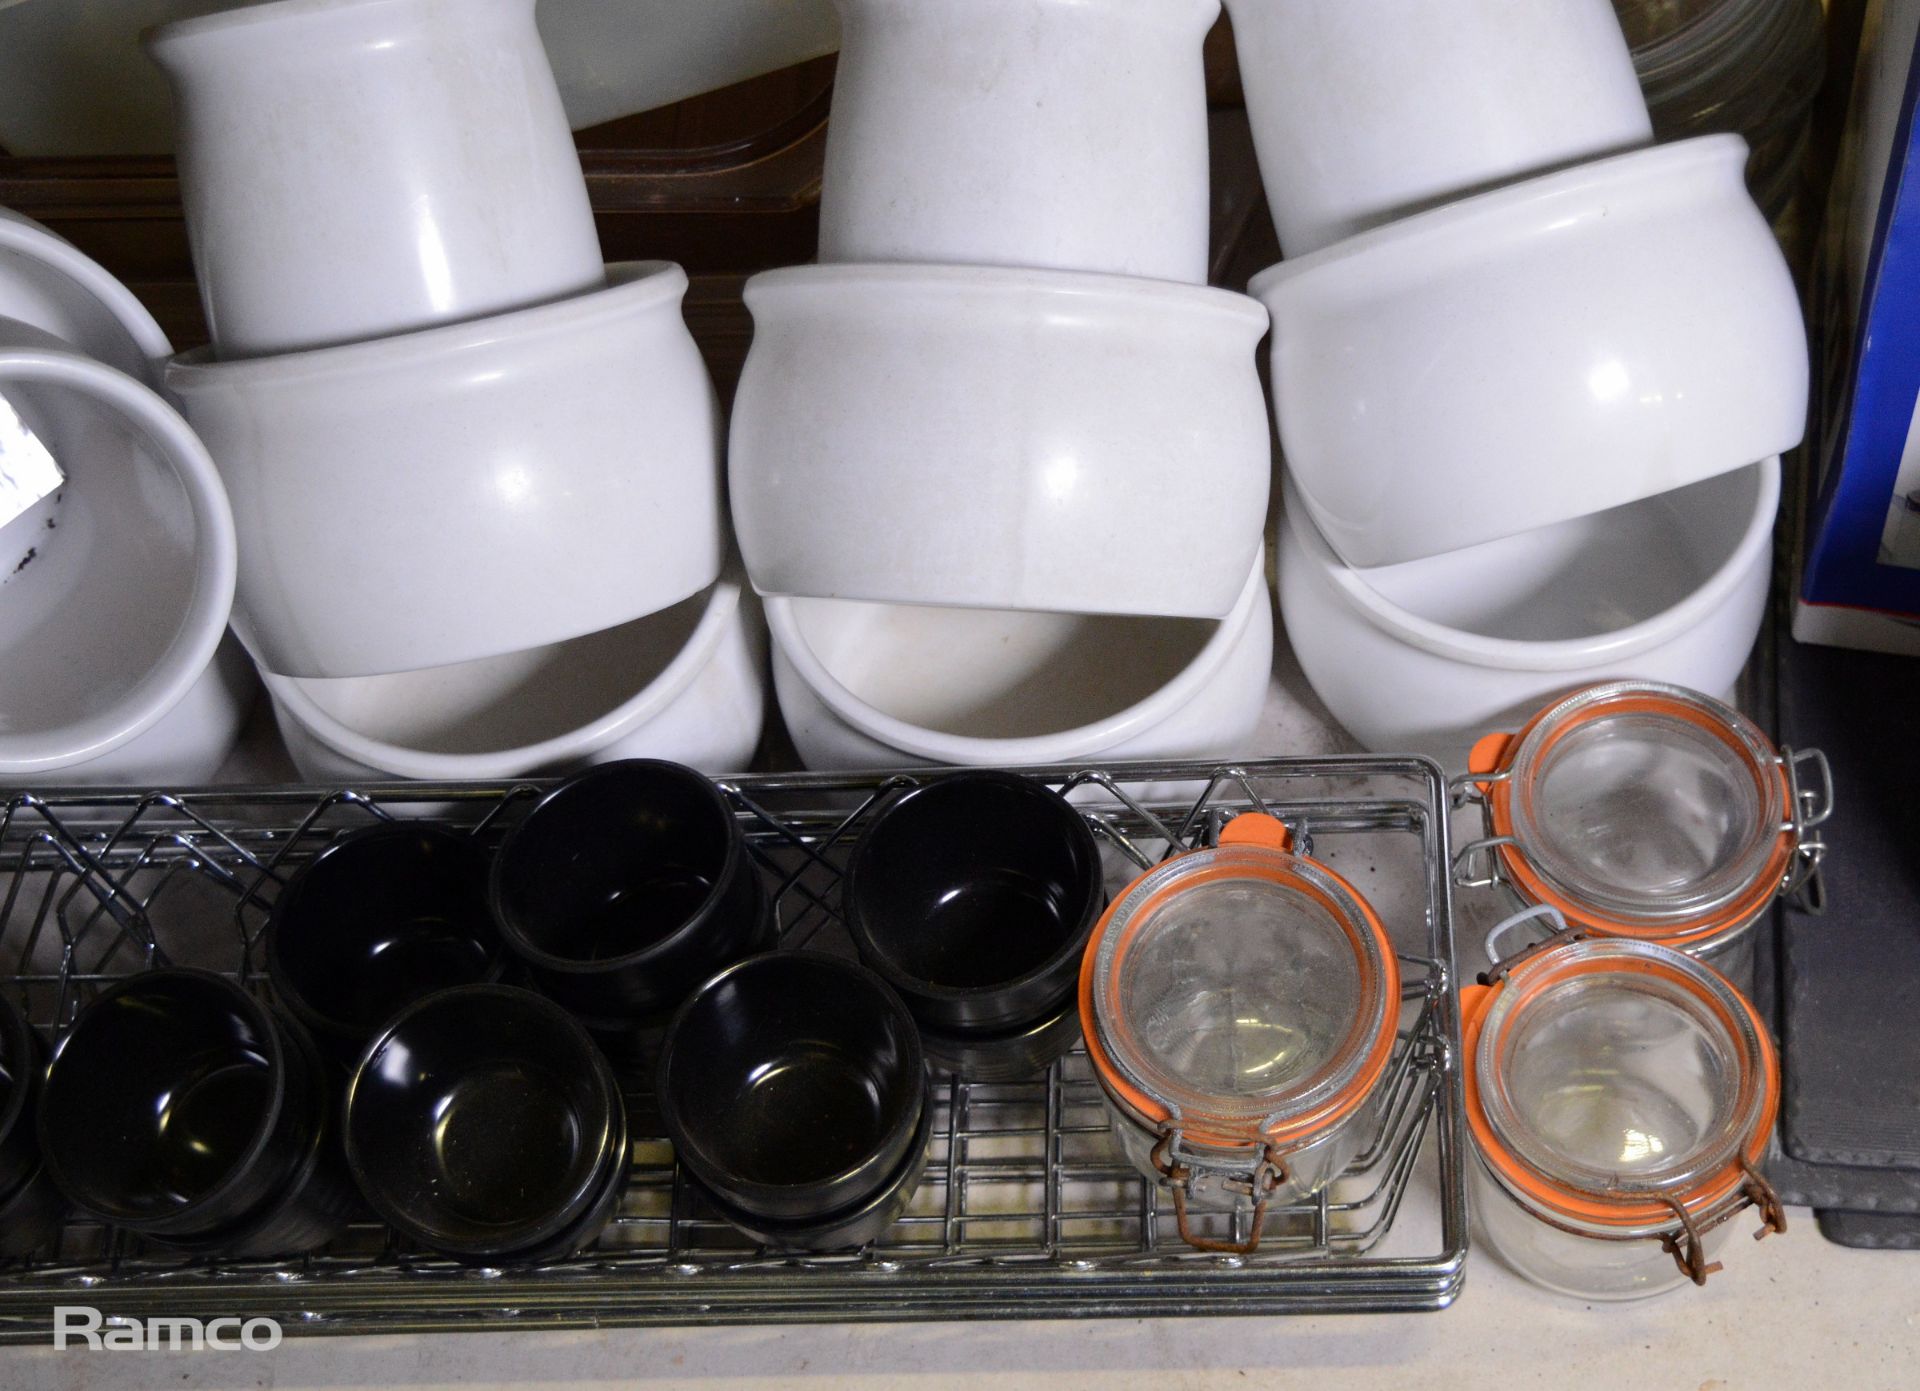 Kitchenware - cutlery and storage tubs - Image 3 of 5